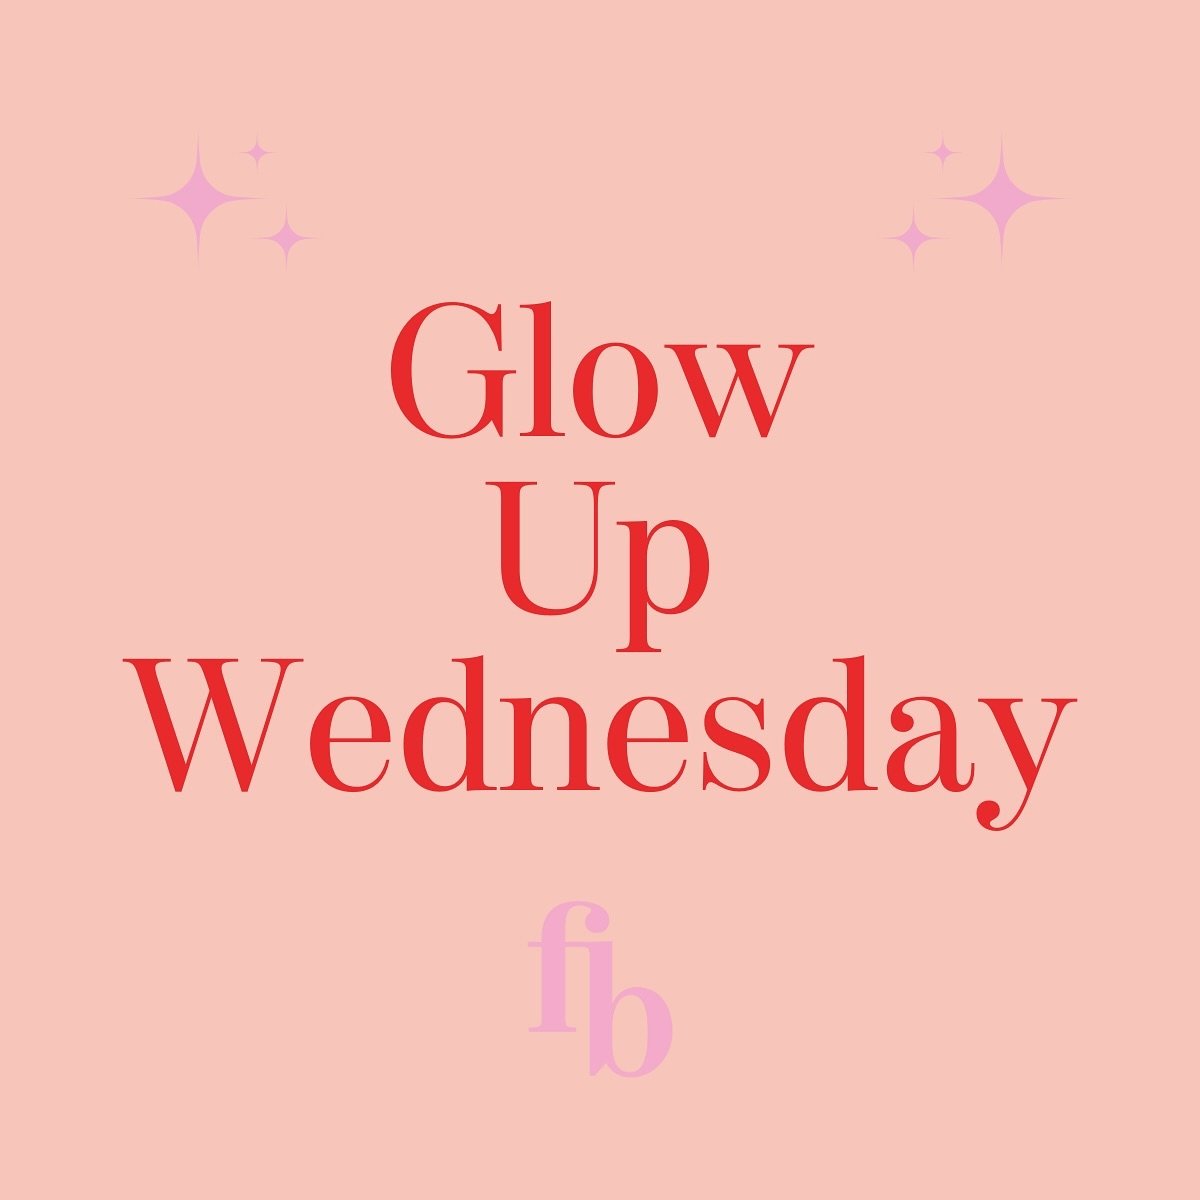 Glow Up Wednesday is back ✨✨✨

Book our promo LED facial with Haylee any Wednesday ✨
$50 (usually valued at $80), (option to add on hand and arm massage for $10)

This treatment includes- Double cleanse + 30 minutes of LED treatment time + finishing 